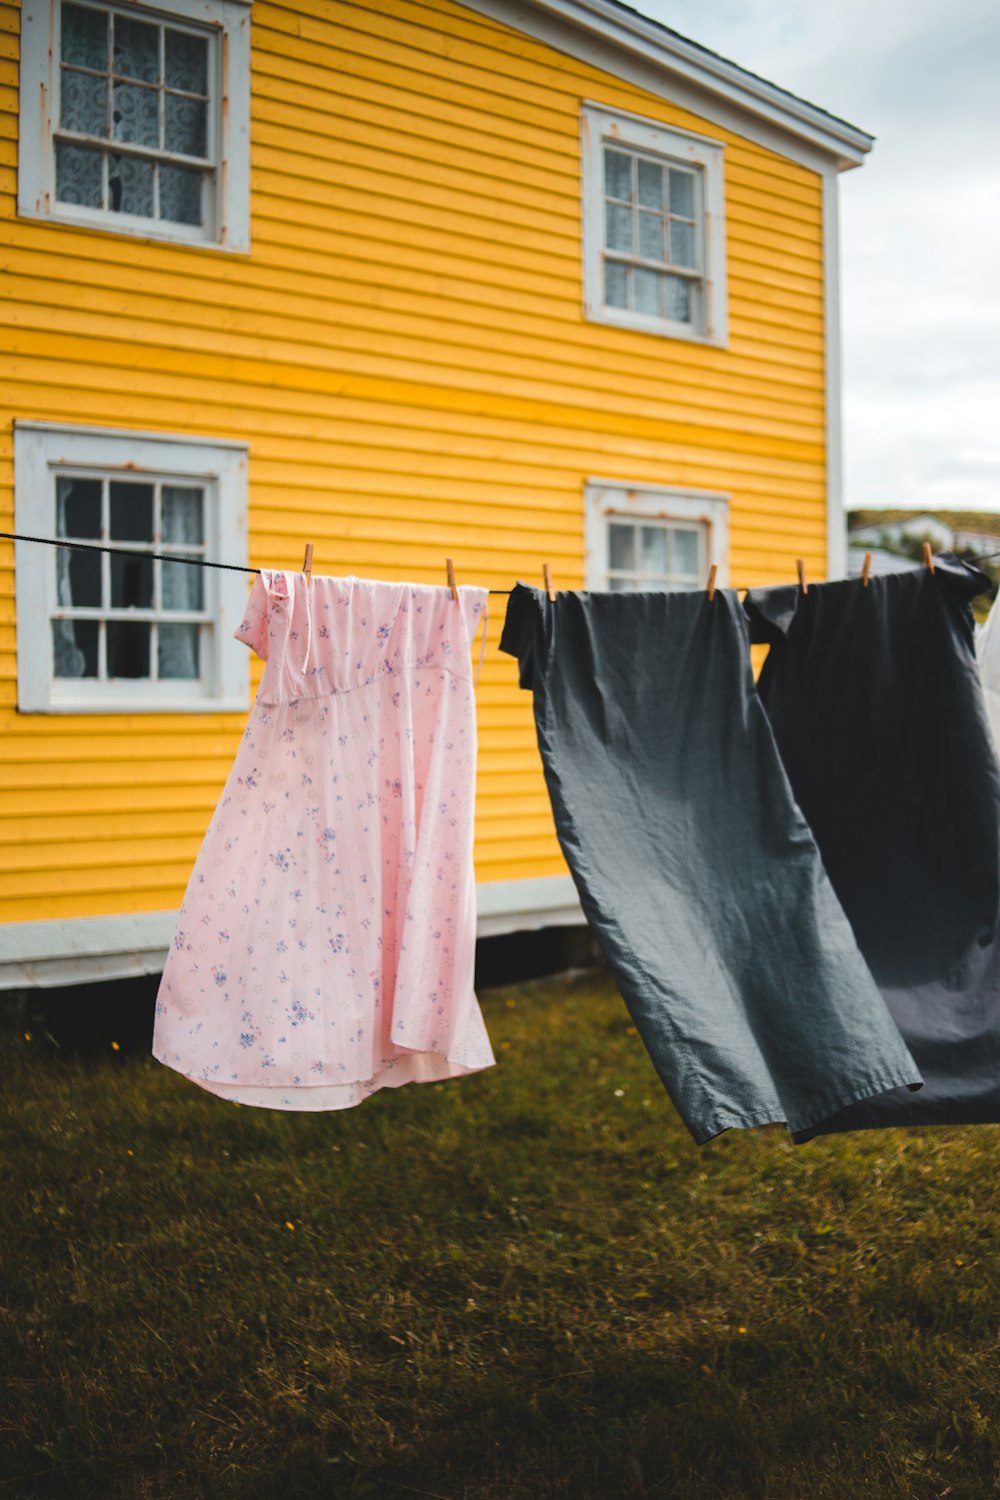 clothes hanging on a clothes line in front of a yellow house